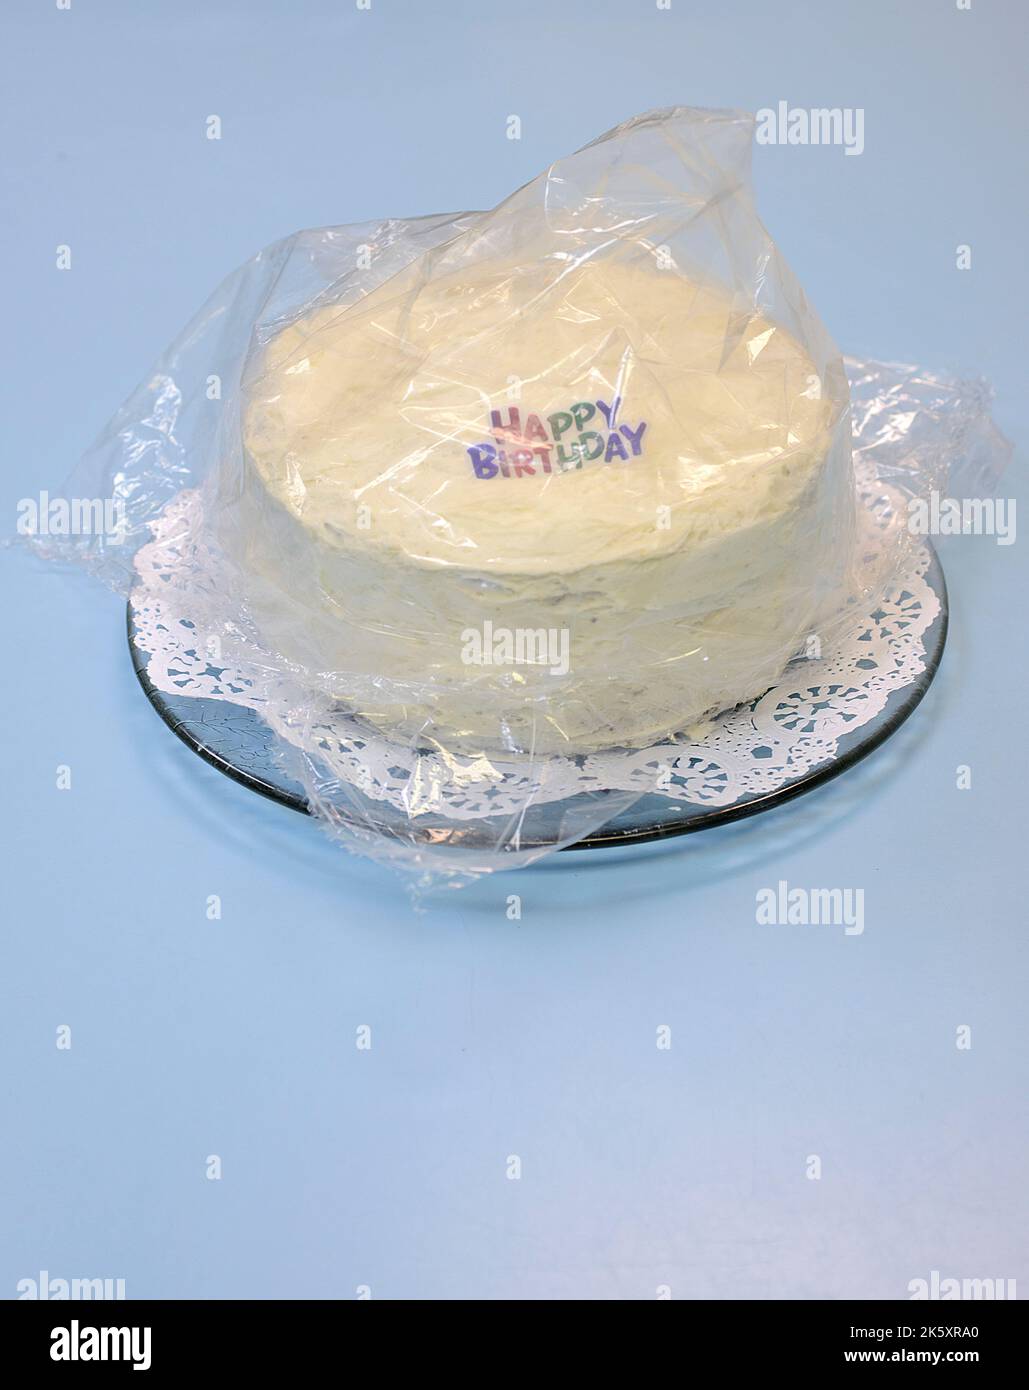 Birthday Cake covered with Plastic Wrapping Stock Photo